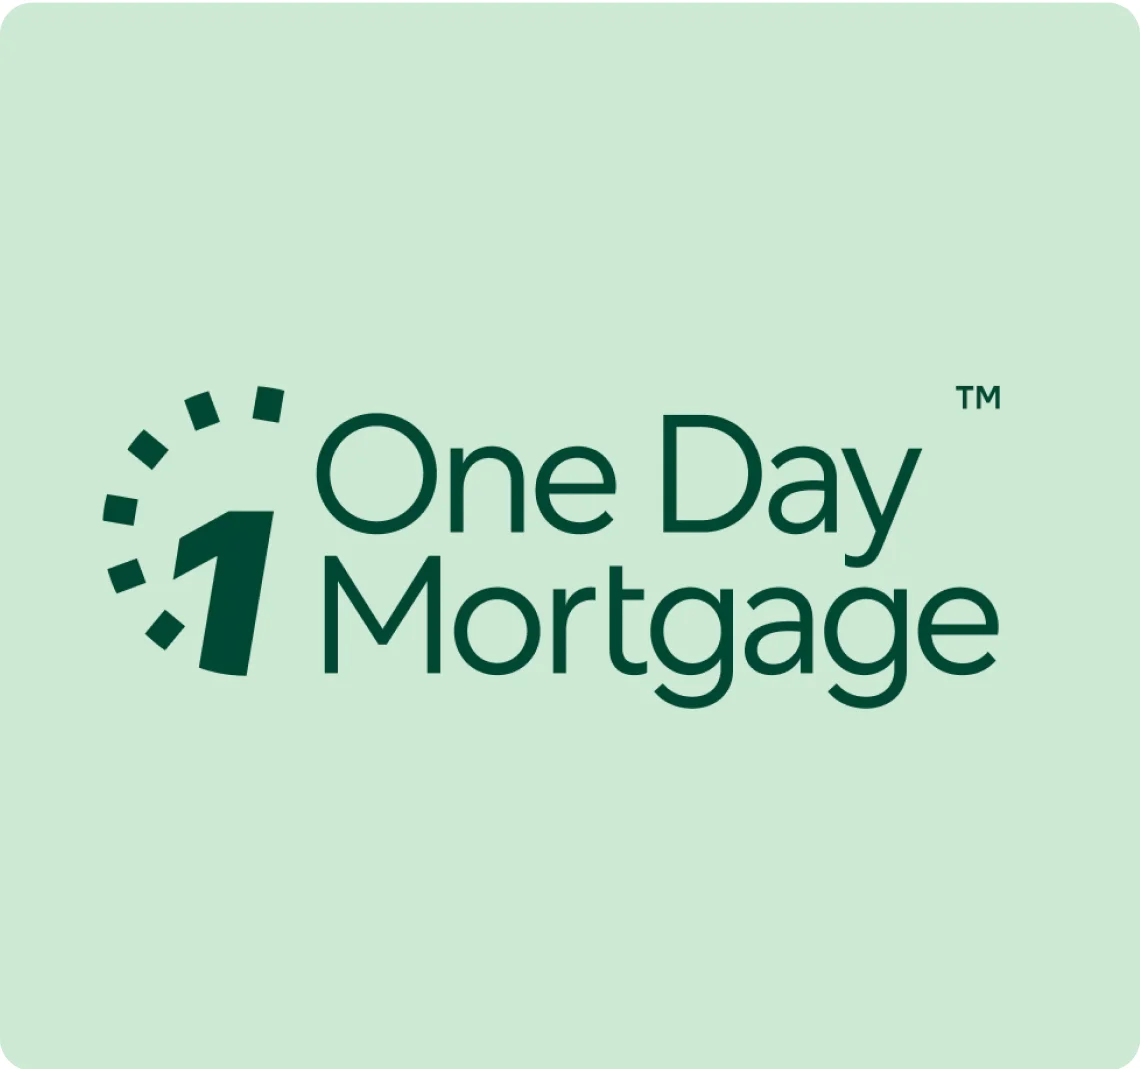 One day mortgage